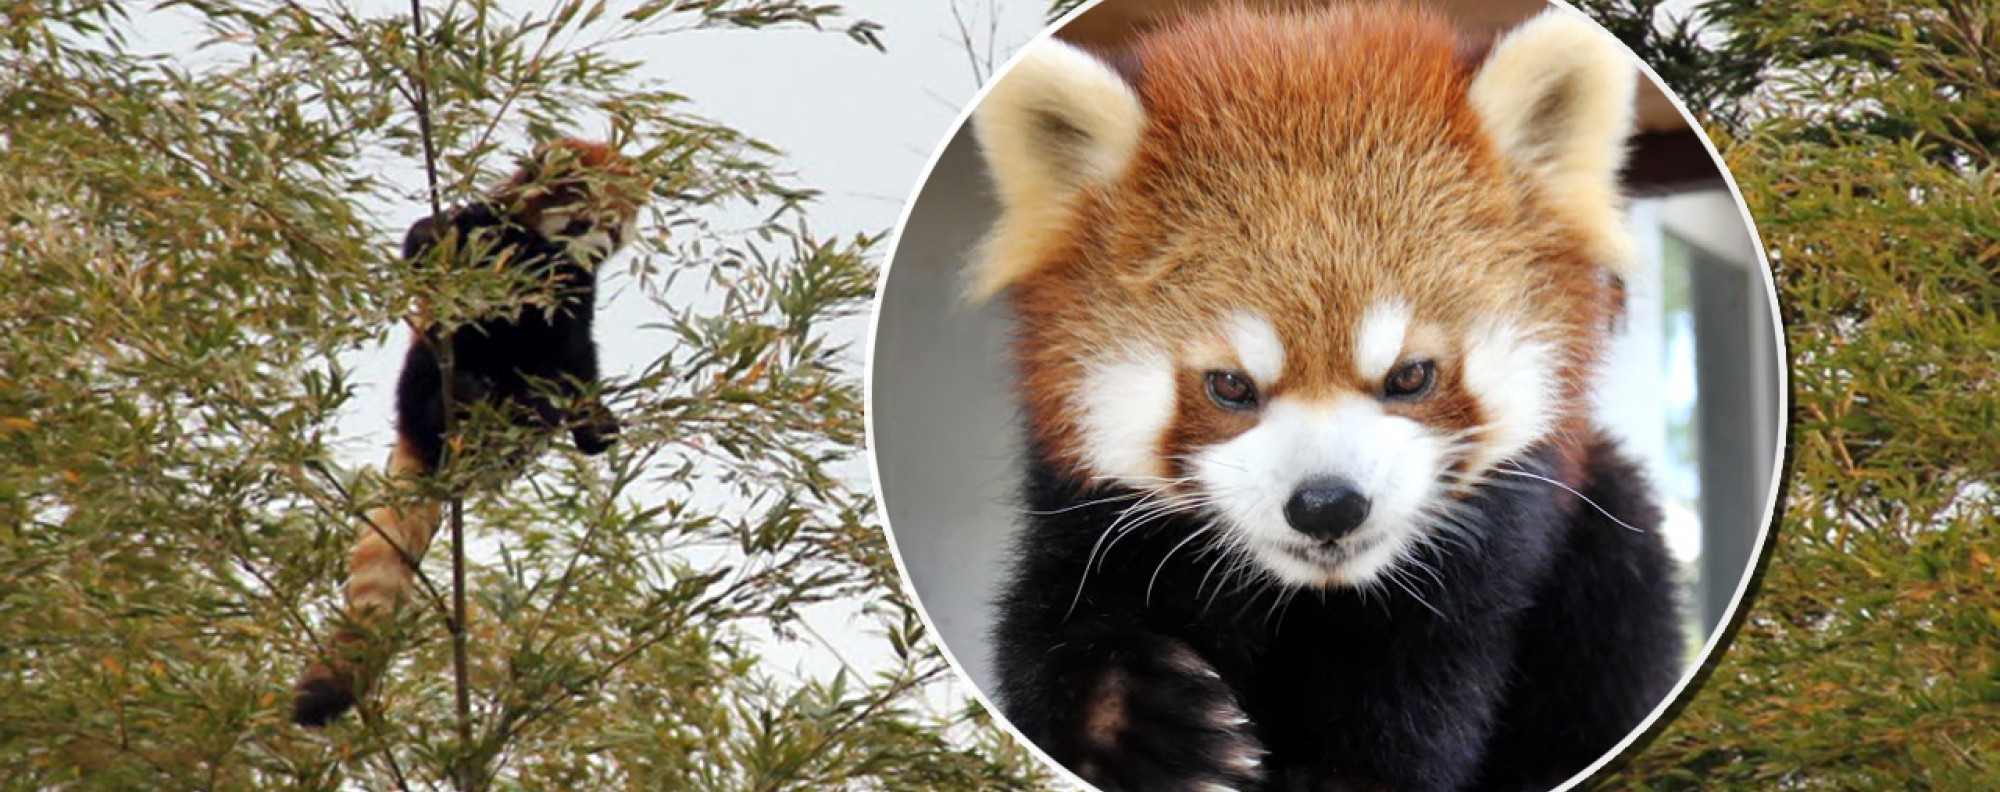 Bamboozled Japanese Zoo Recovers Runaway Red Panda After Frantic Search South China Morning Post